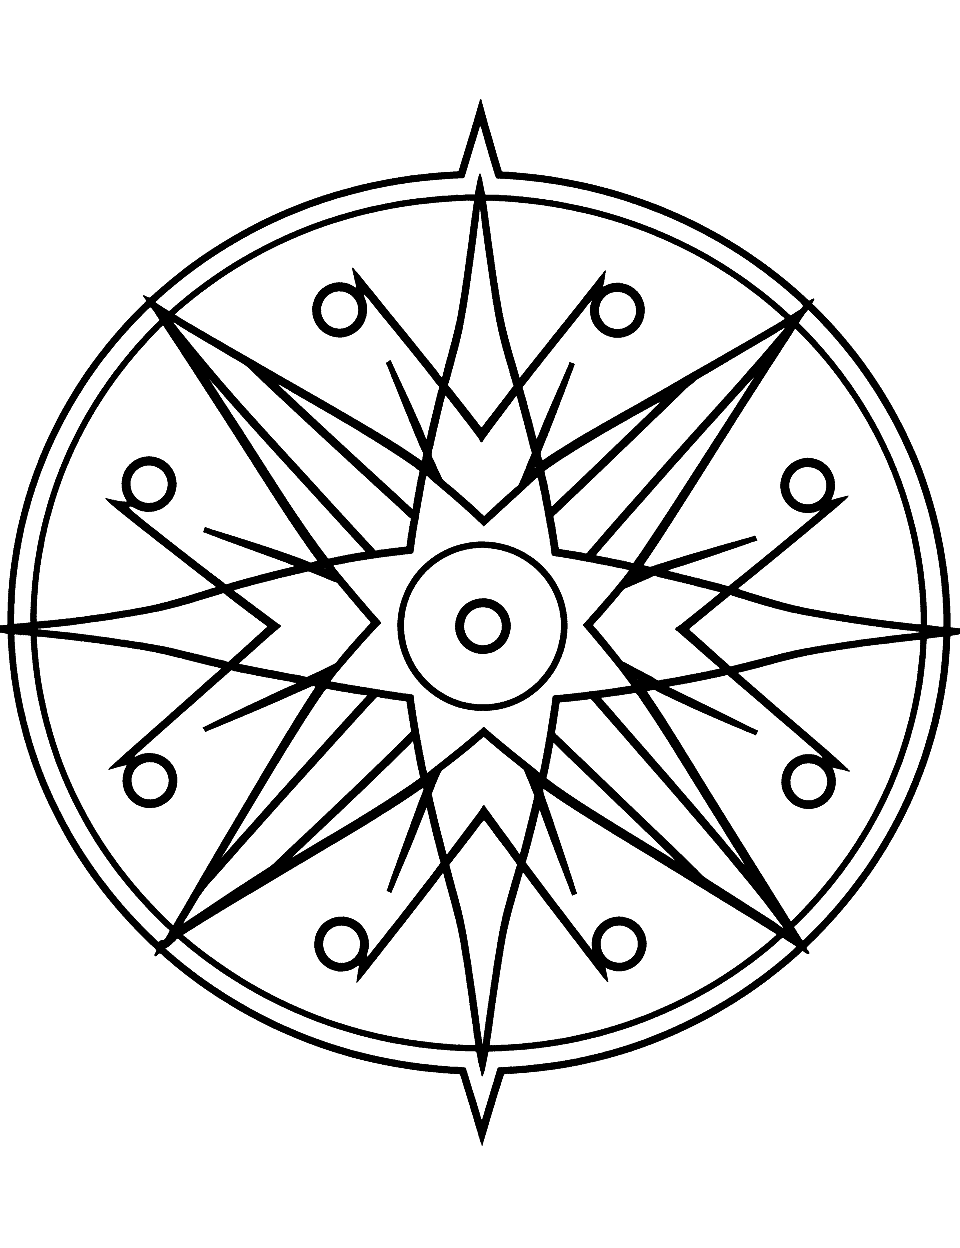 Sparkling Star Mandala Coloring Page - A mandala with different star patterns, allowing kids to experiment with colors and sparkly decorations.